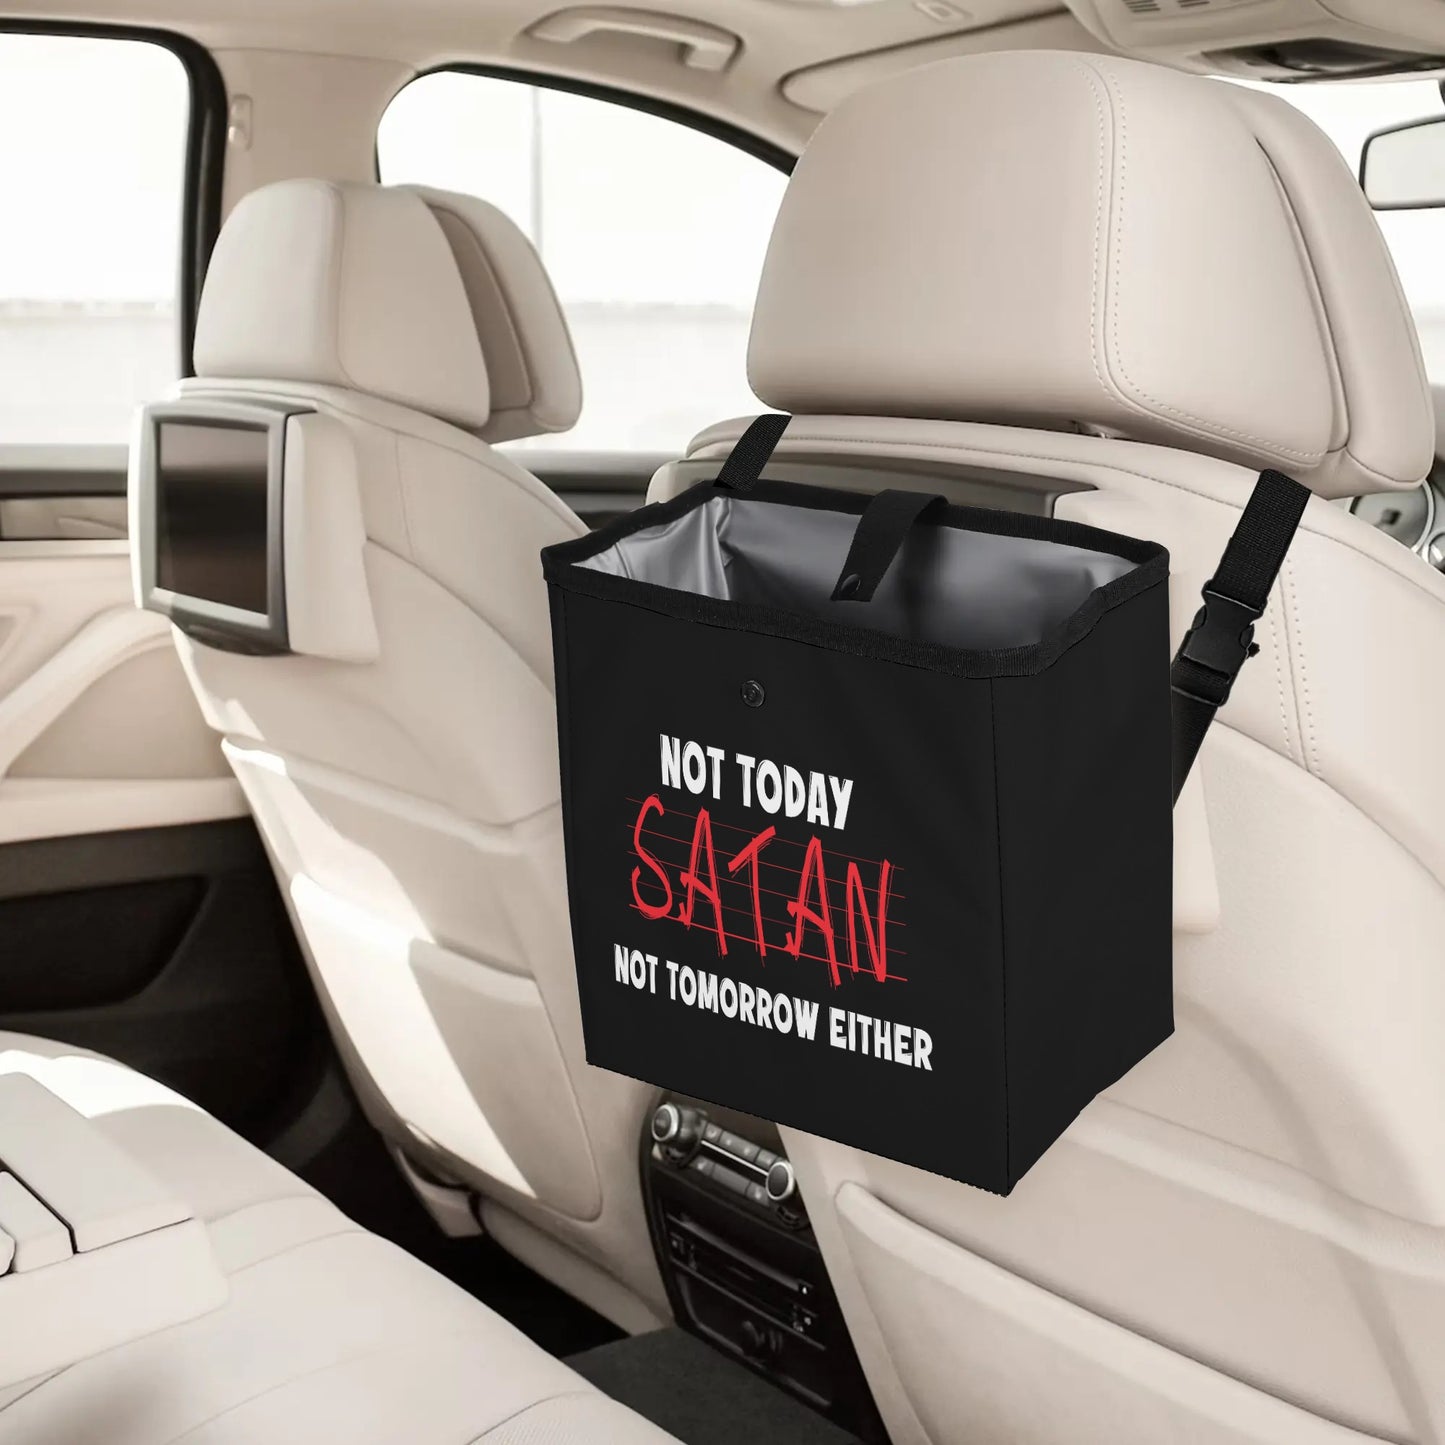 Not Today Satan Not Tomorrow Either Hanging Storage Trash Car Organizer Bag Christian Car Accessories popcustoms